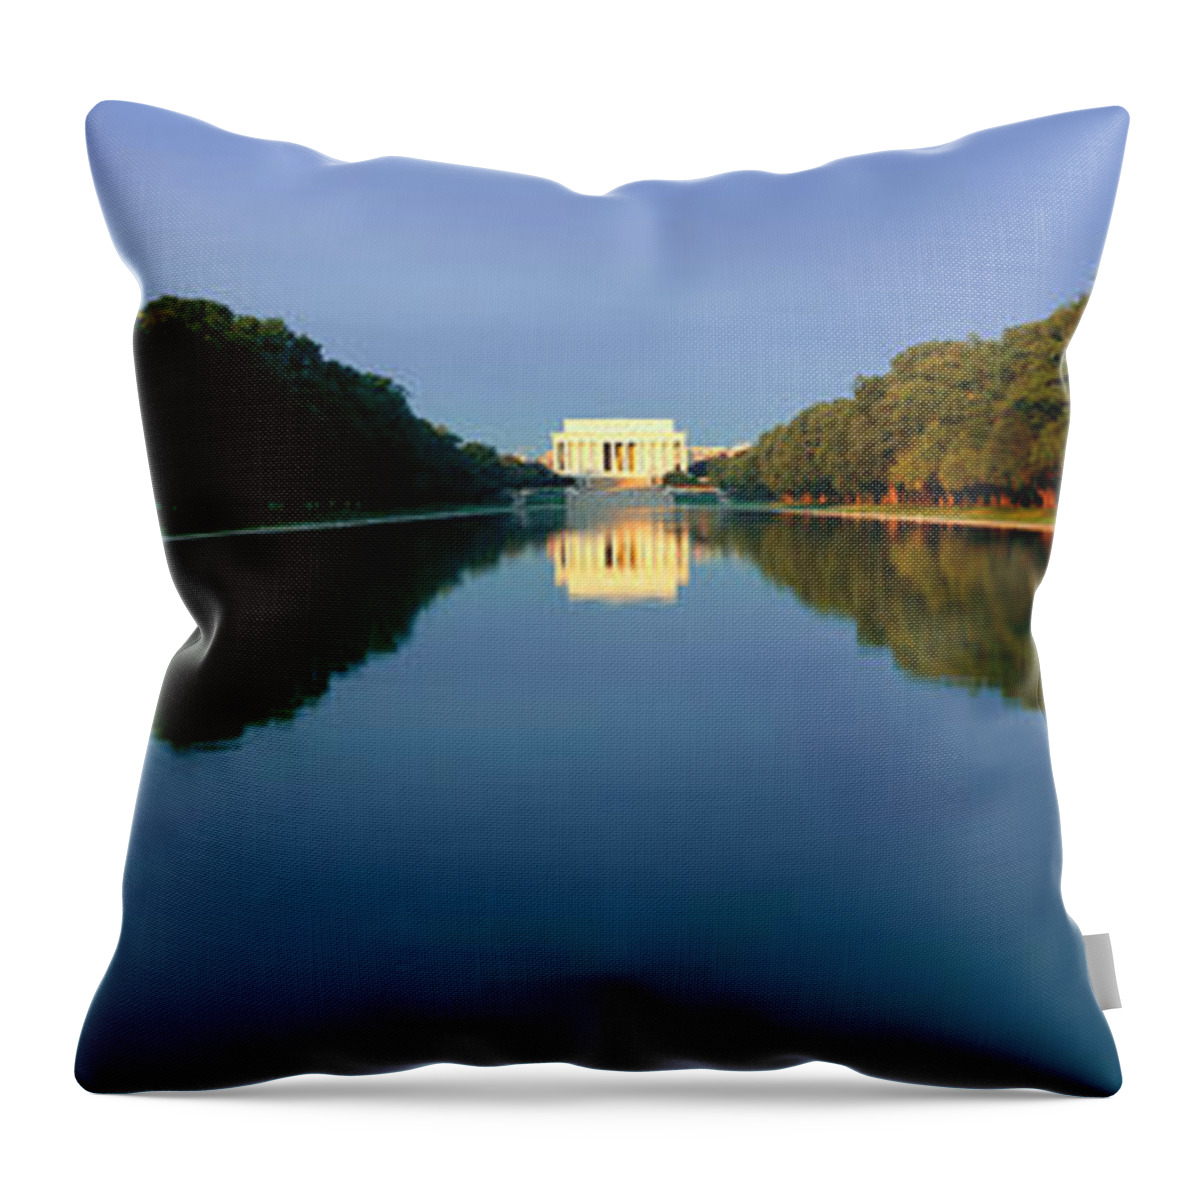 Photography Throw Pillow featuring the photograph The Lincoln Memorial At Sunrise by Panoramic Images